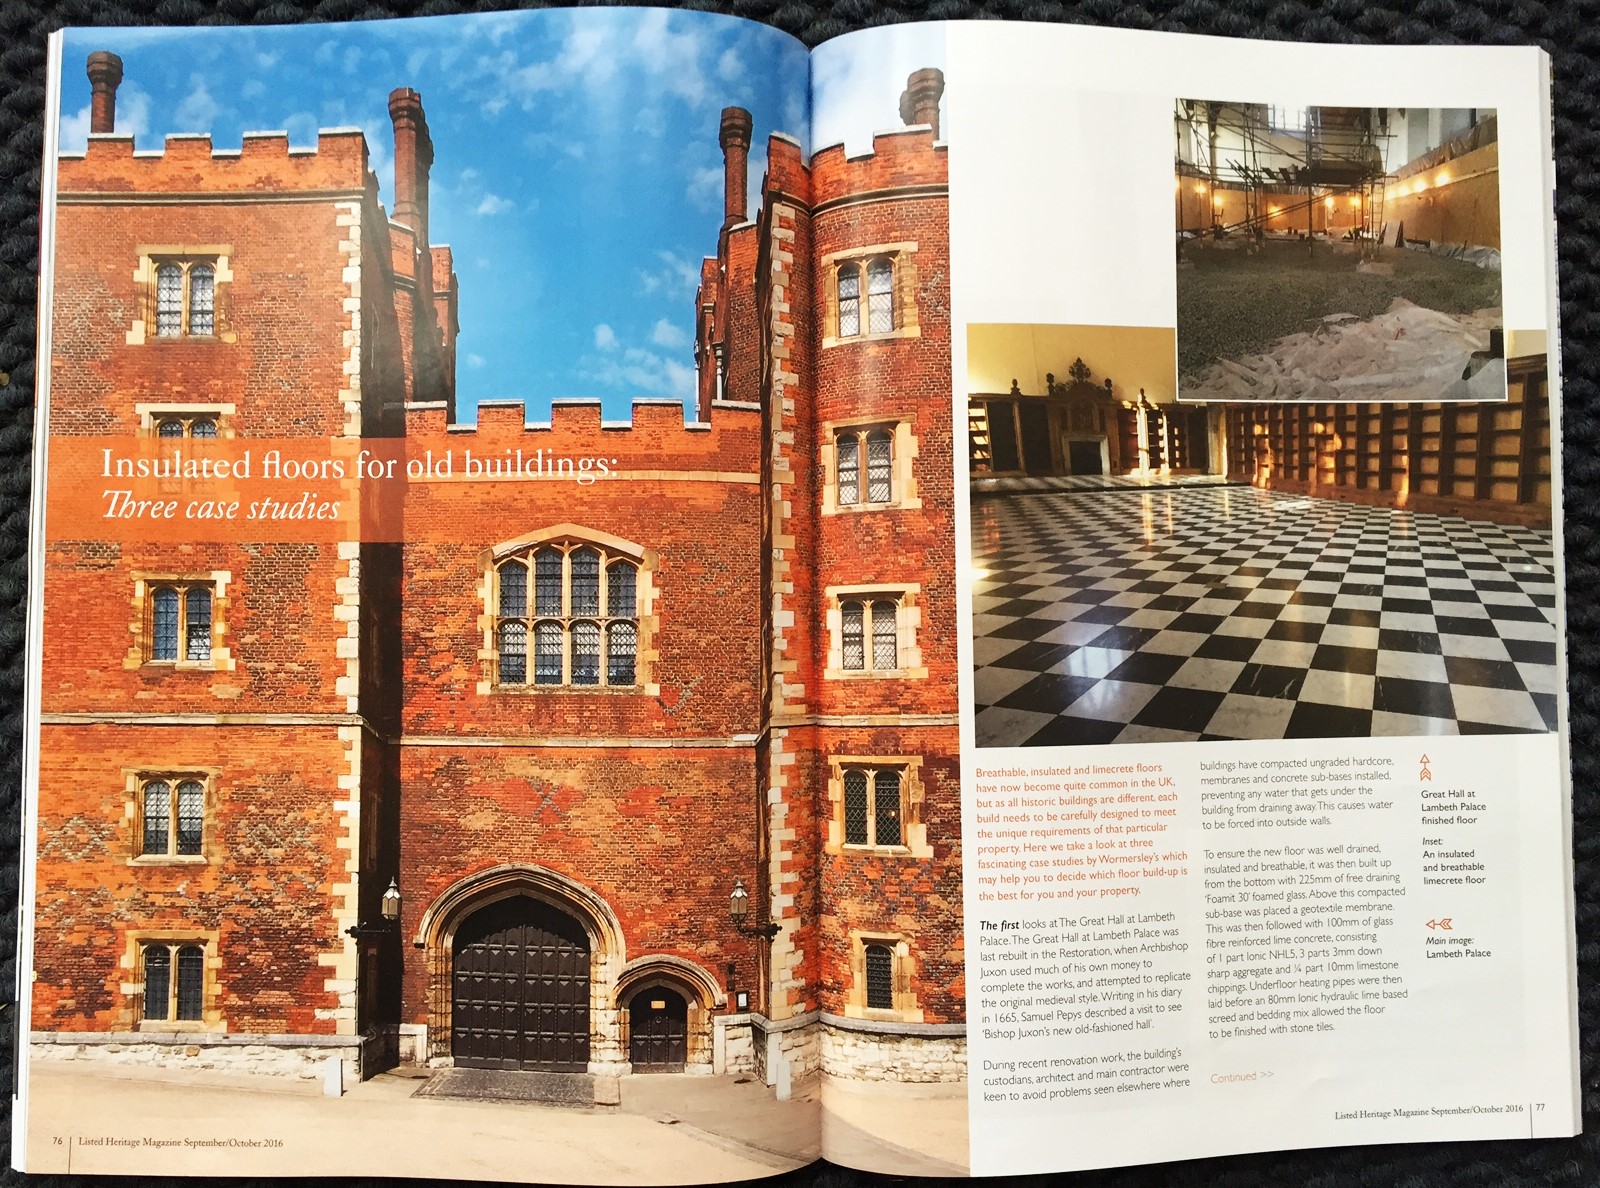 Our latest article in the Listed Heritage Magazine